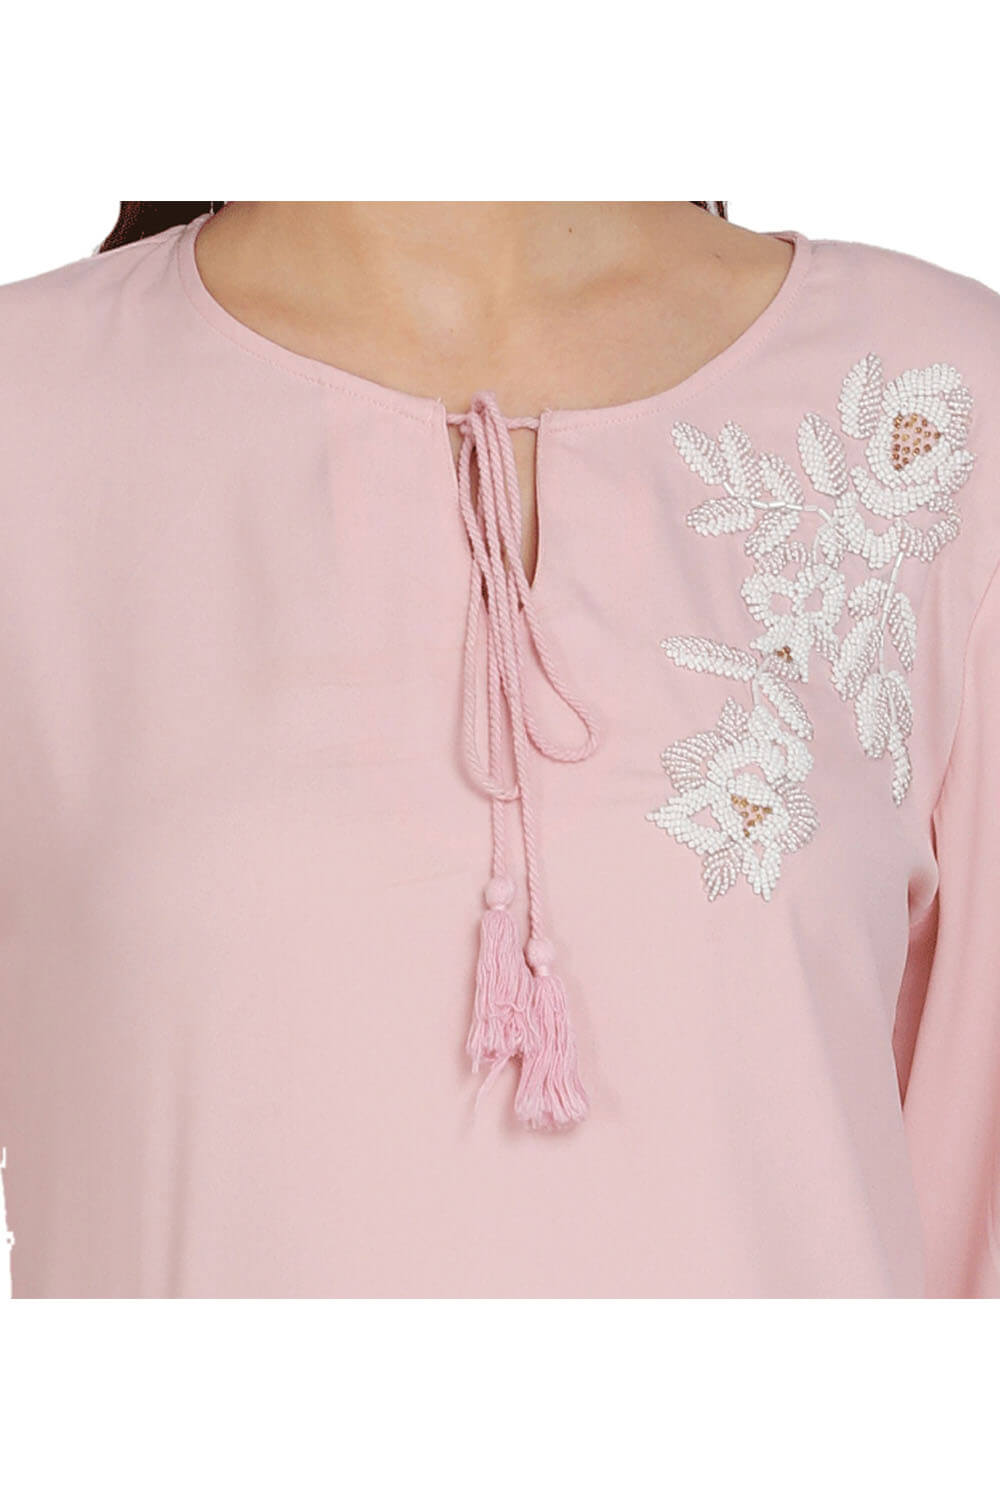 Rosy Glamour Beaded Top with Ties